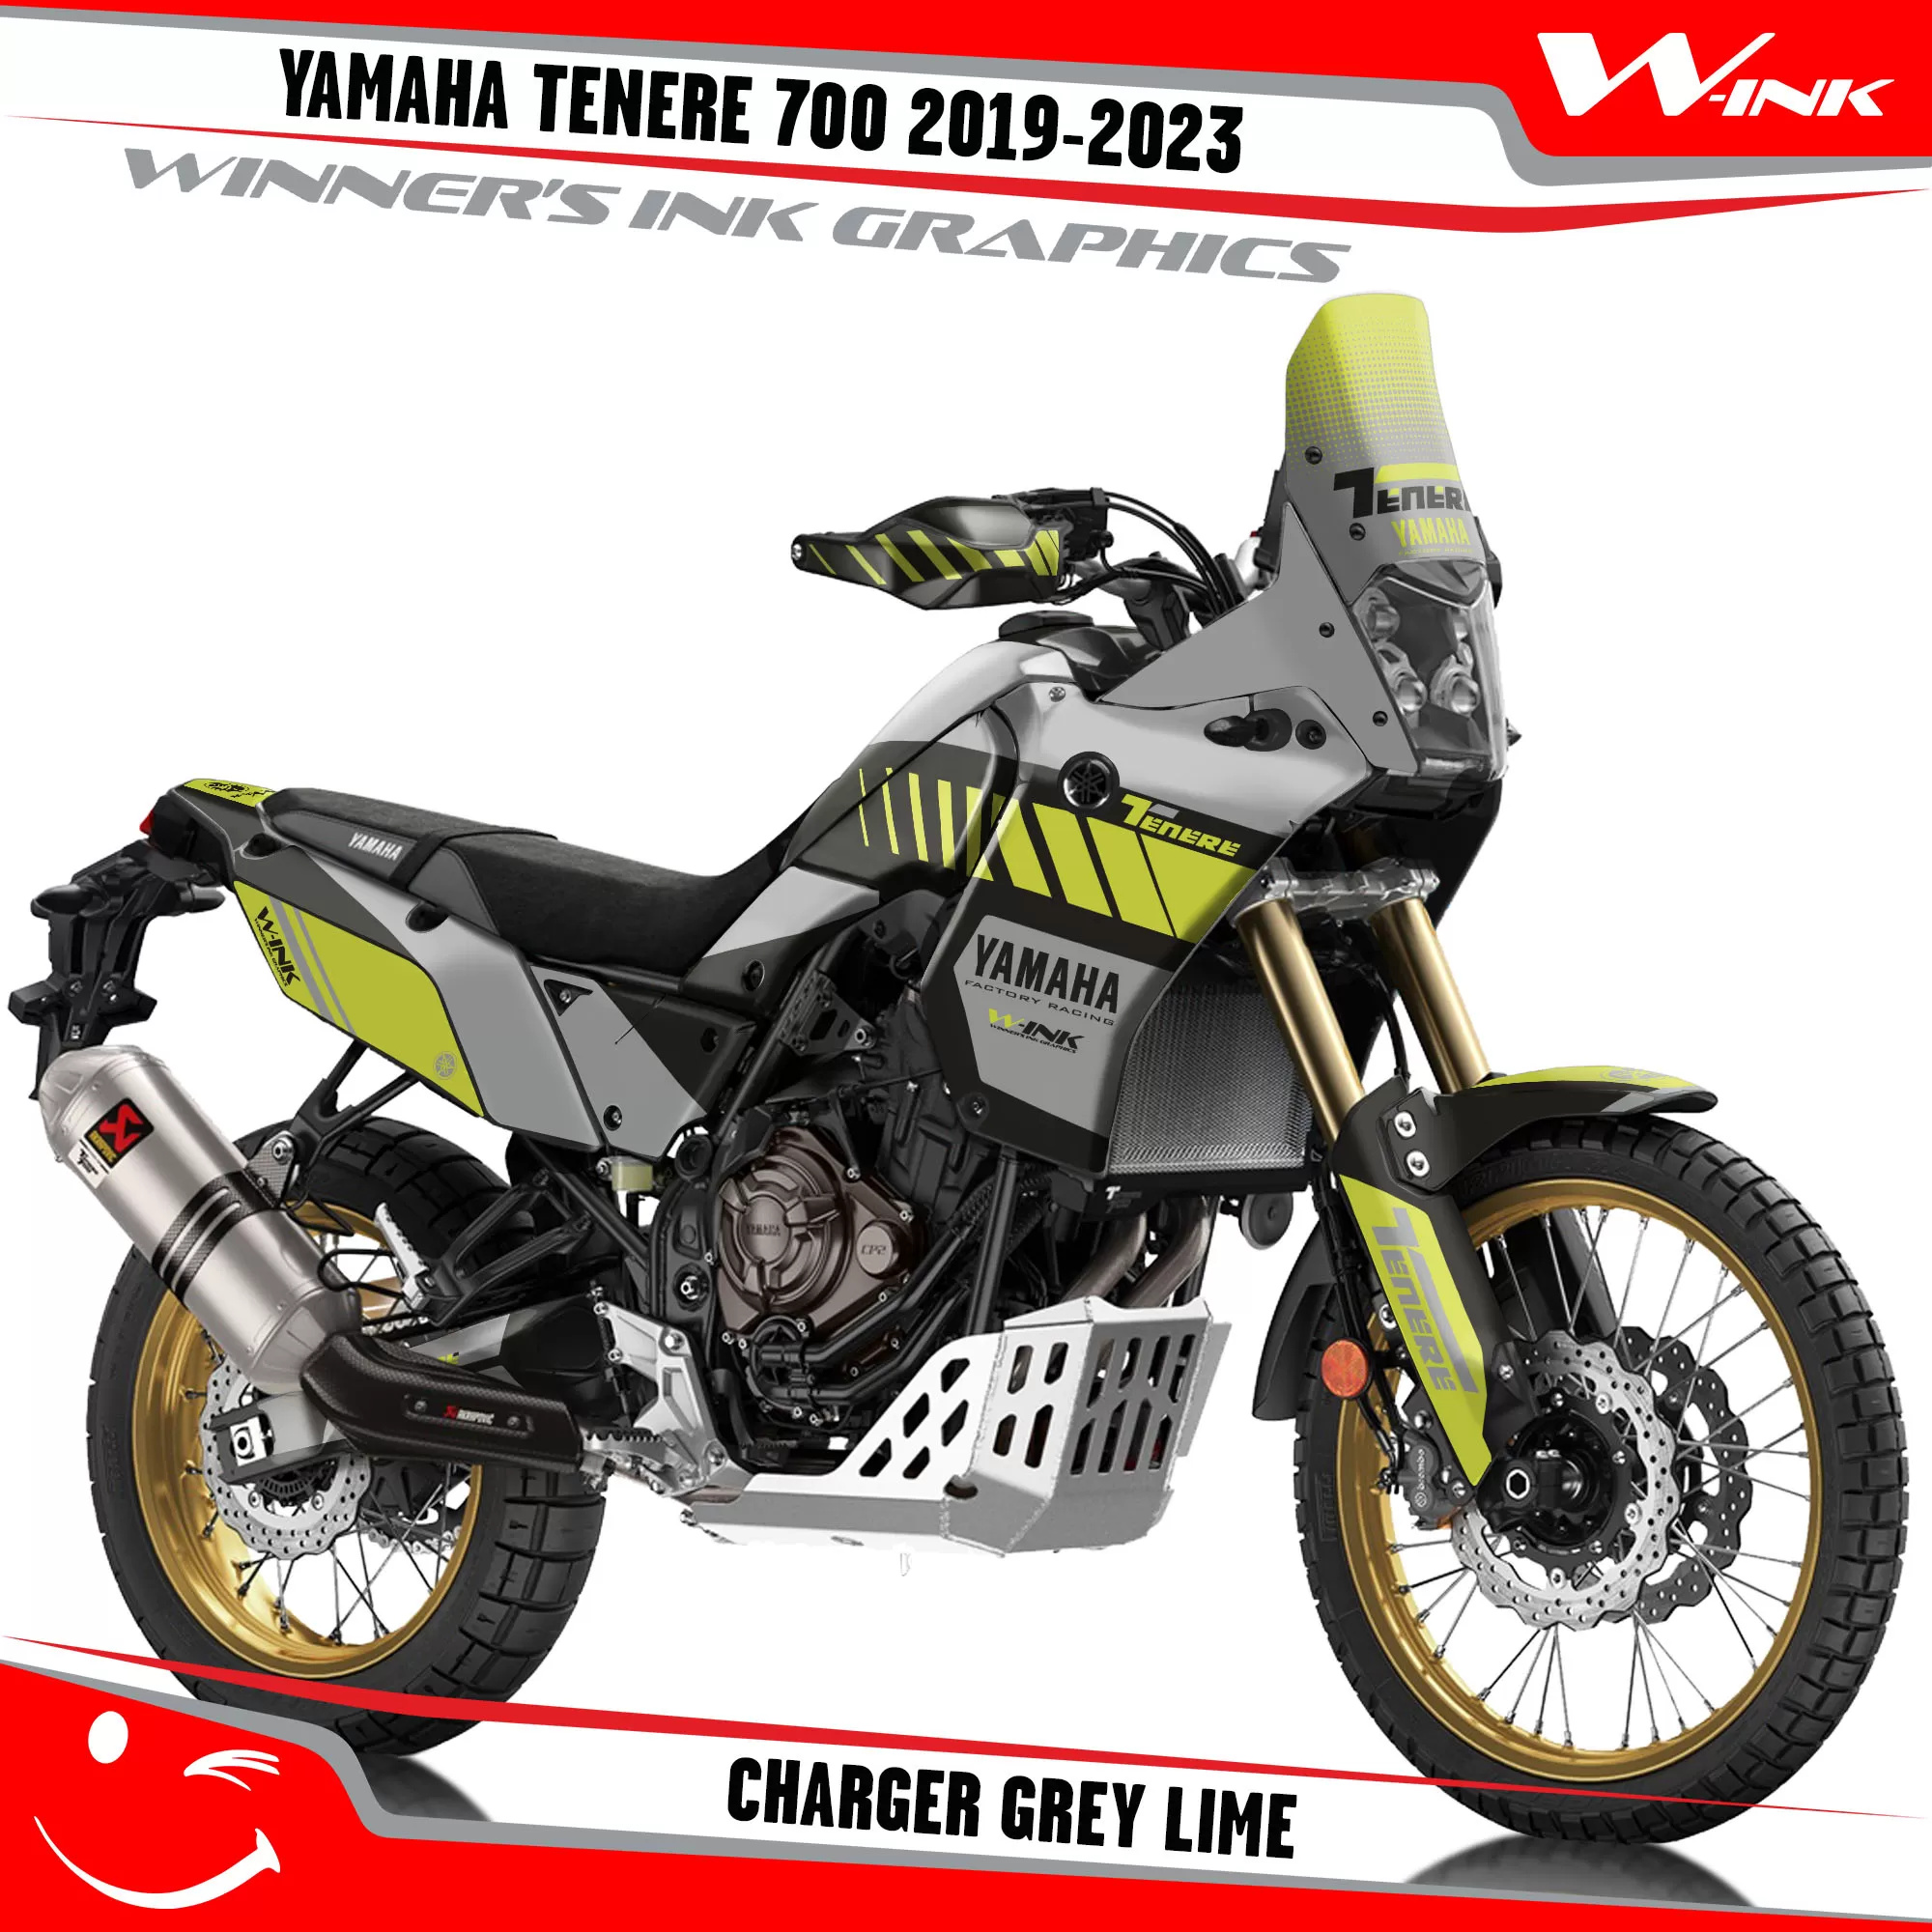 Yamaha-Tenere-700-2019-2020-2021-2022-2023-graphics-kit-and-decals-with-desing-Charger-Grey-Lime